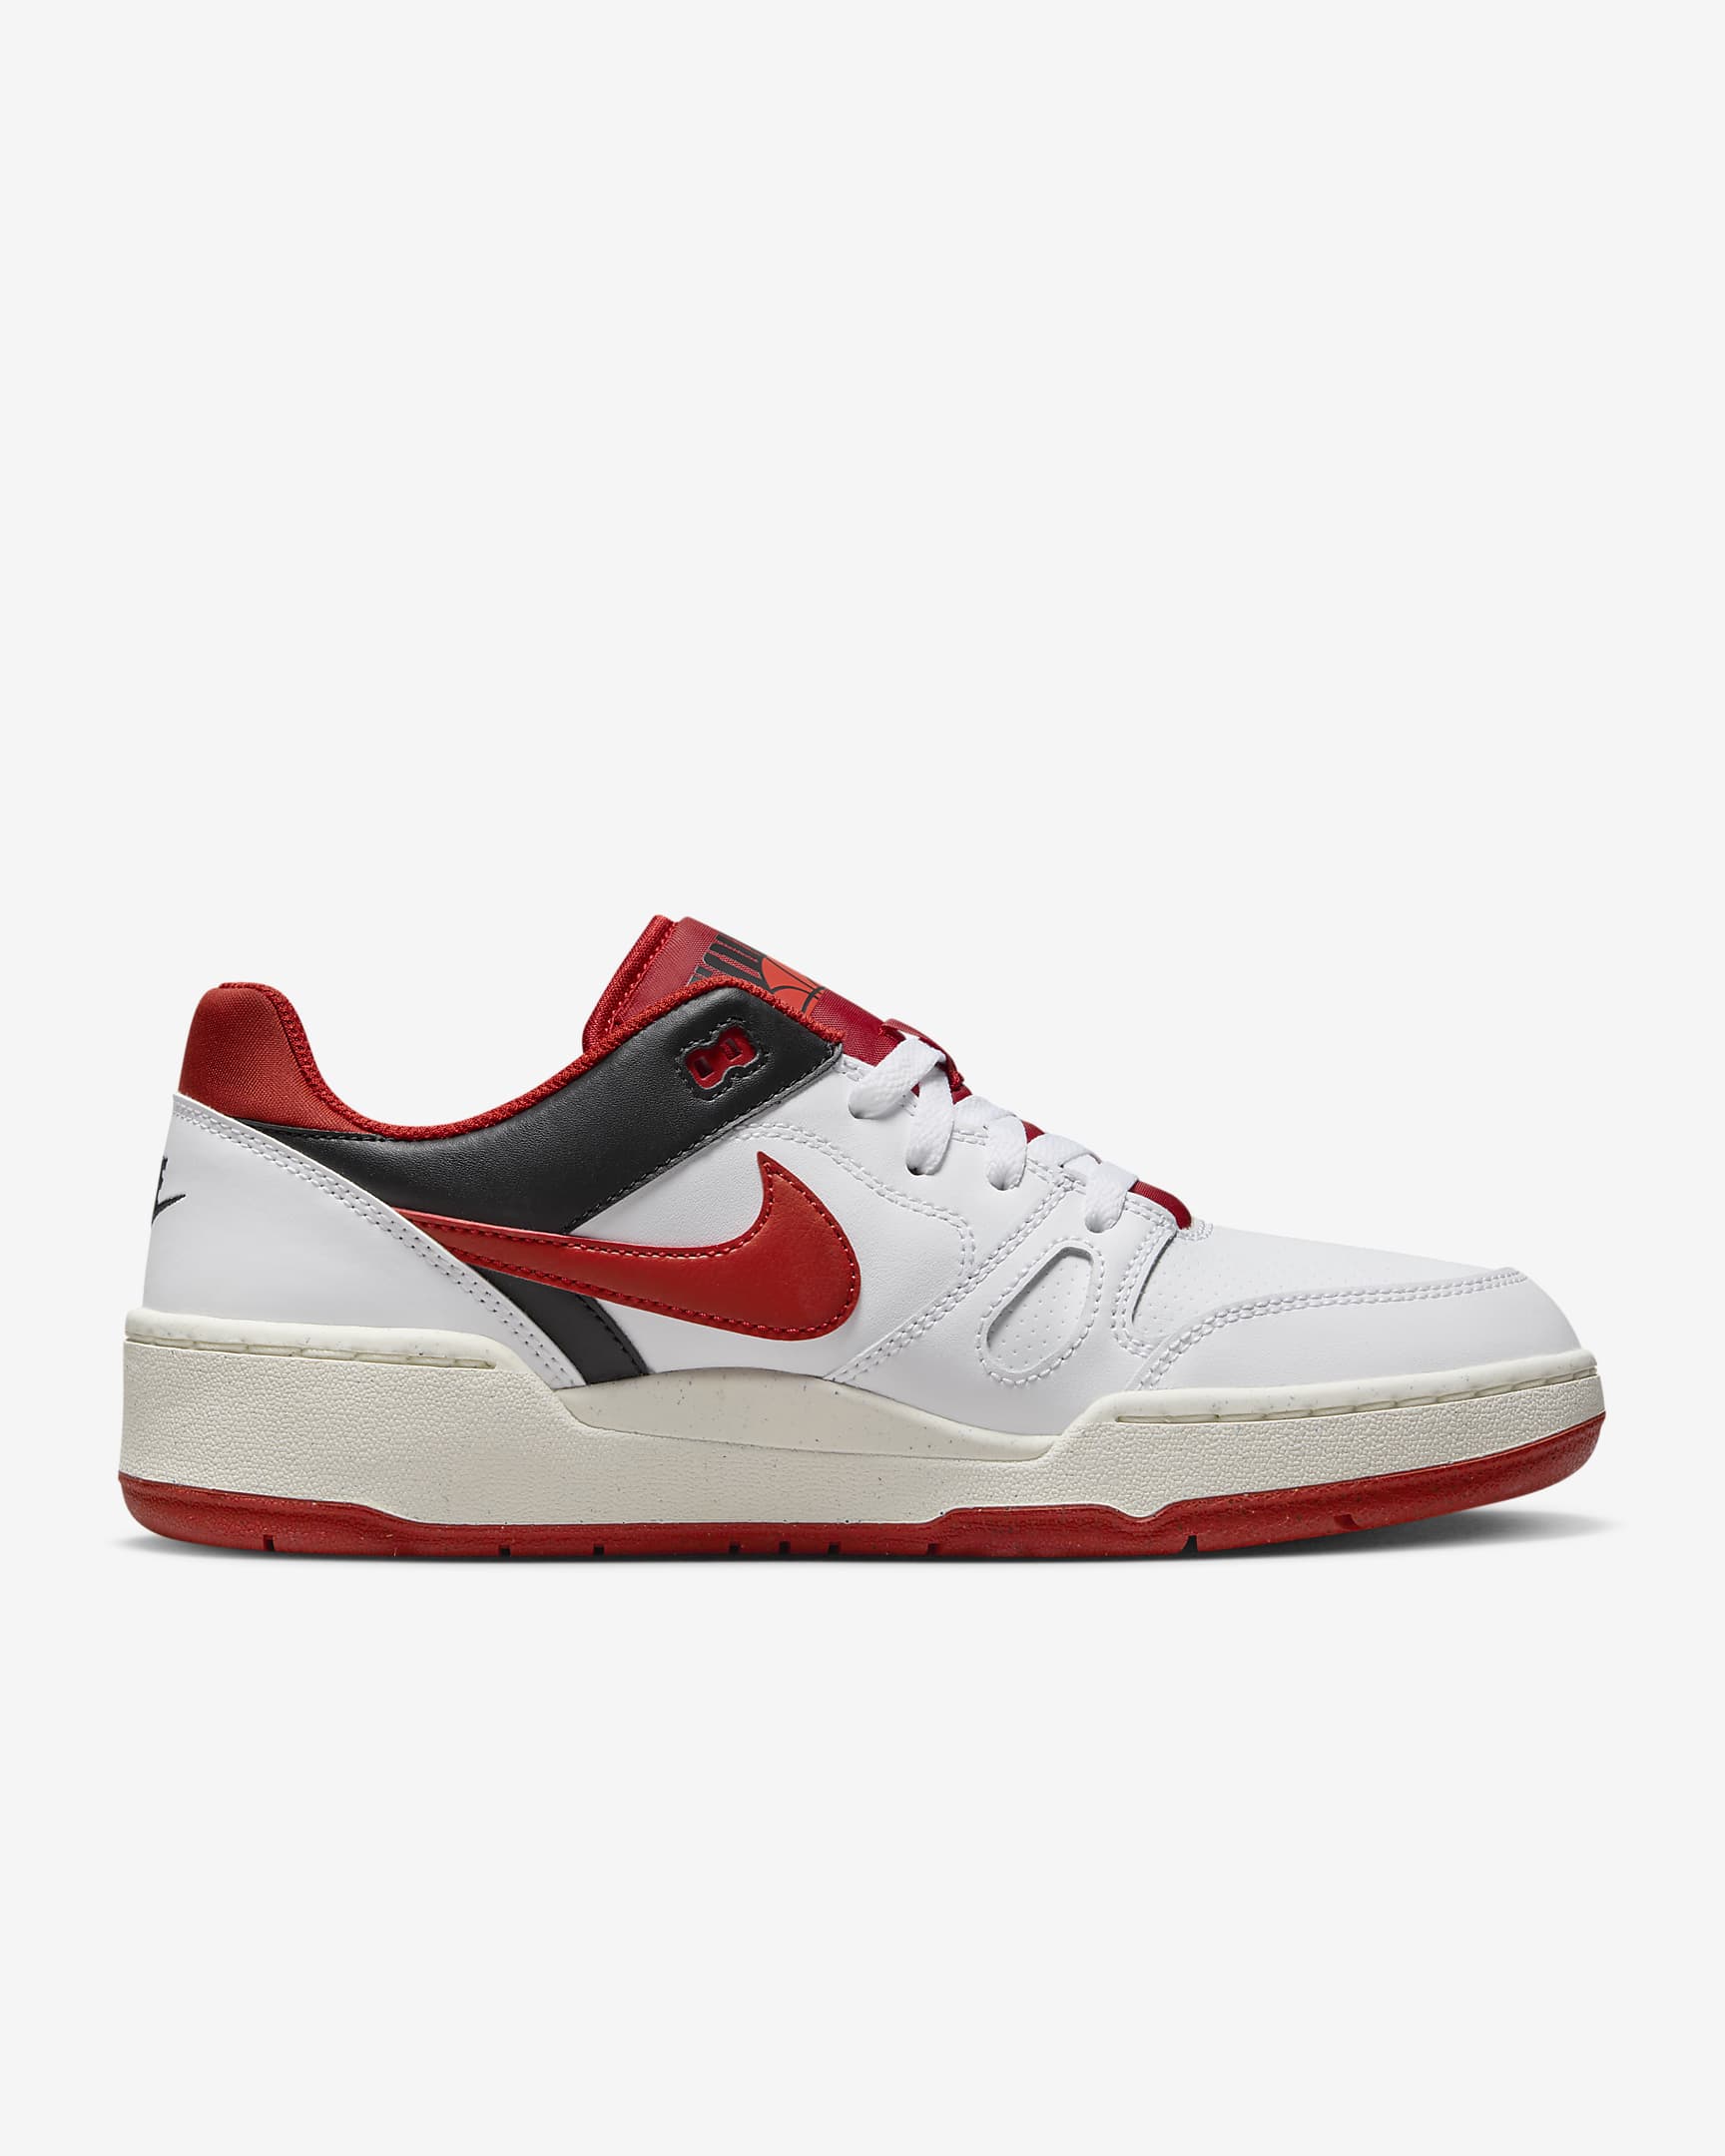 Nike Full Force Low Men's Shoes - White/Black/Sail/Mystic Red